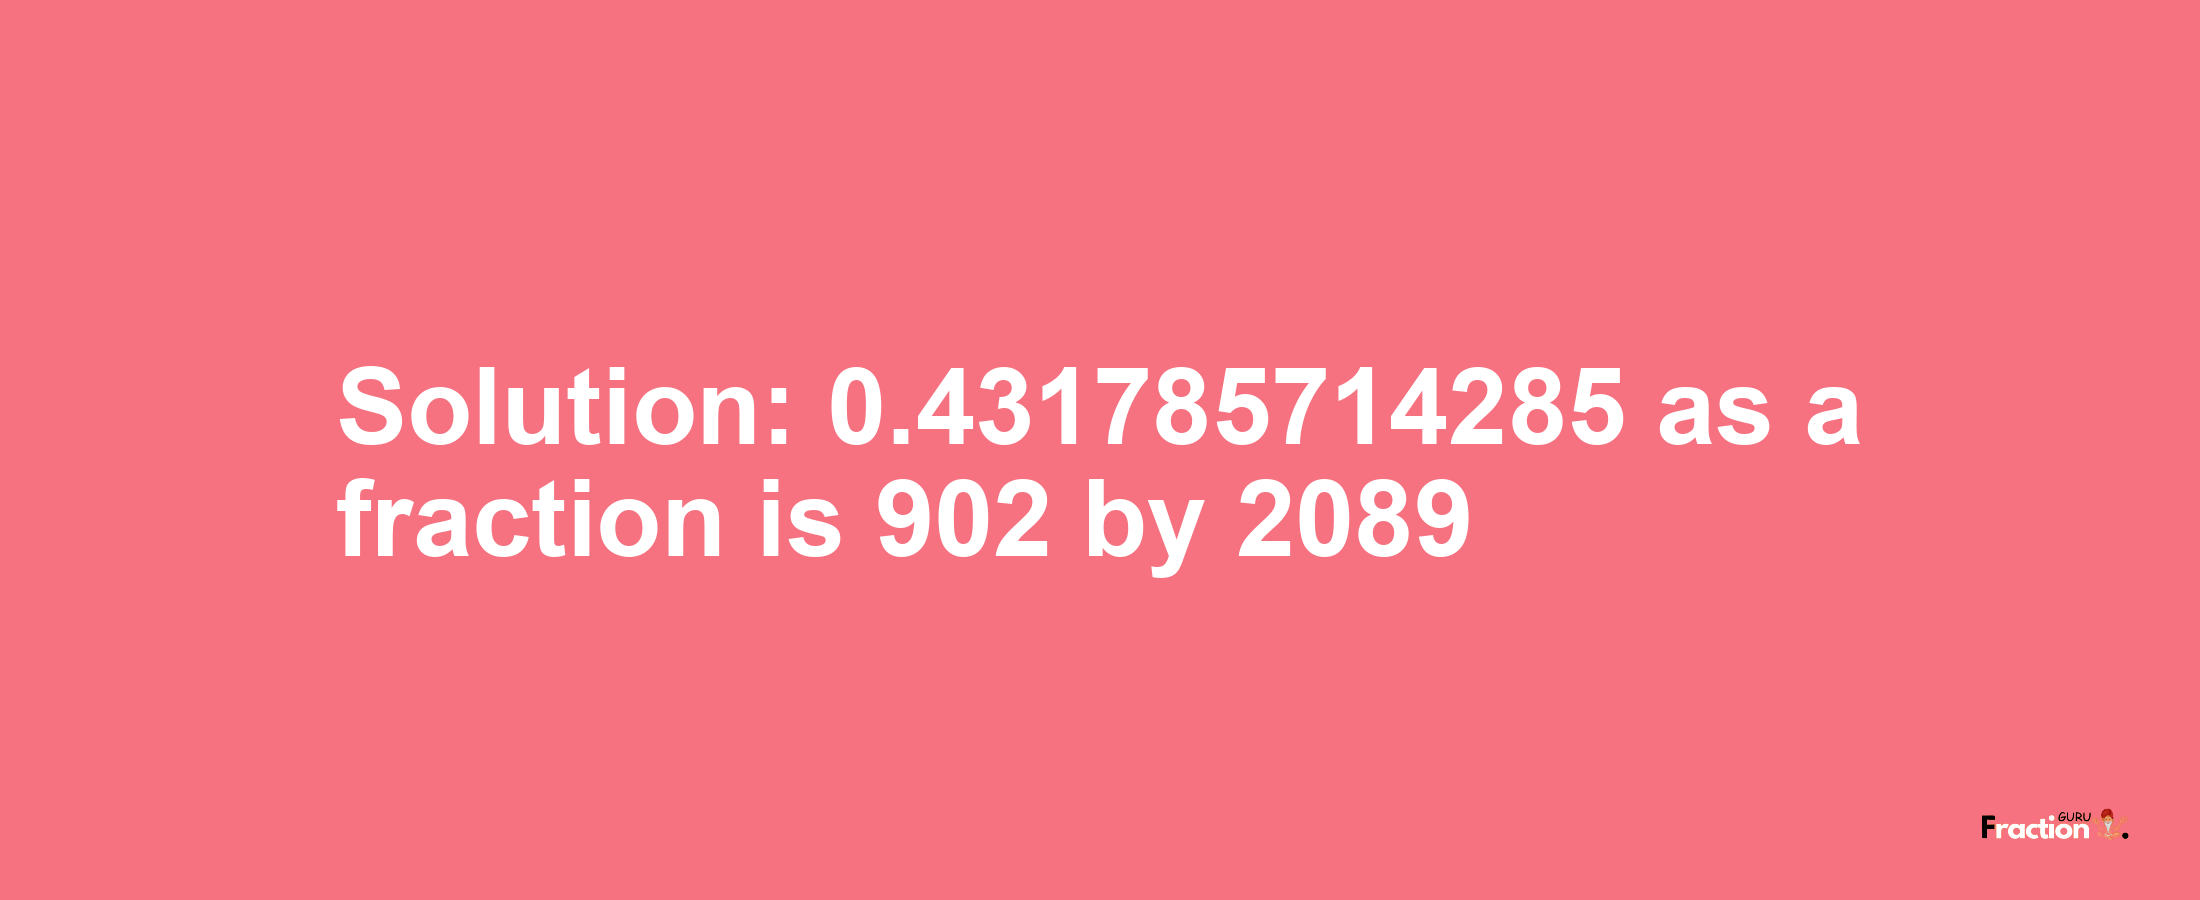 Solution:0.431785714285 as a fraction is 902/2089